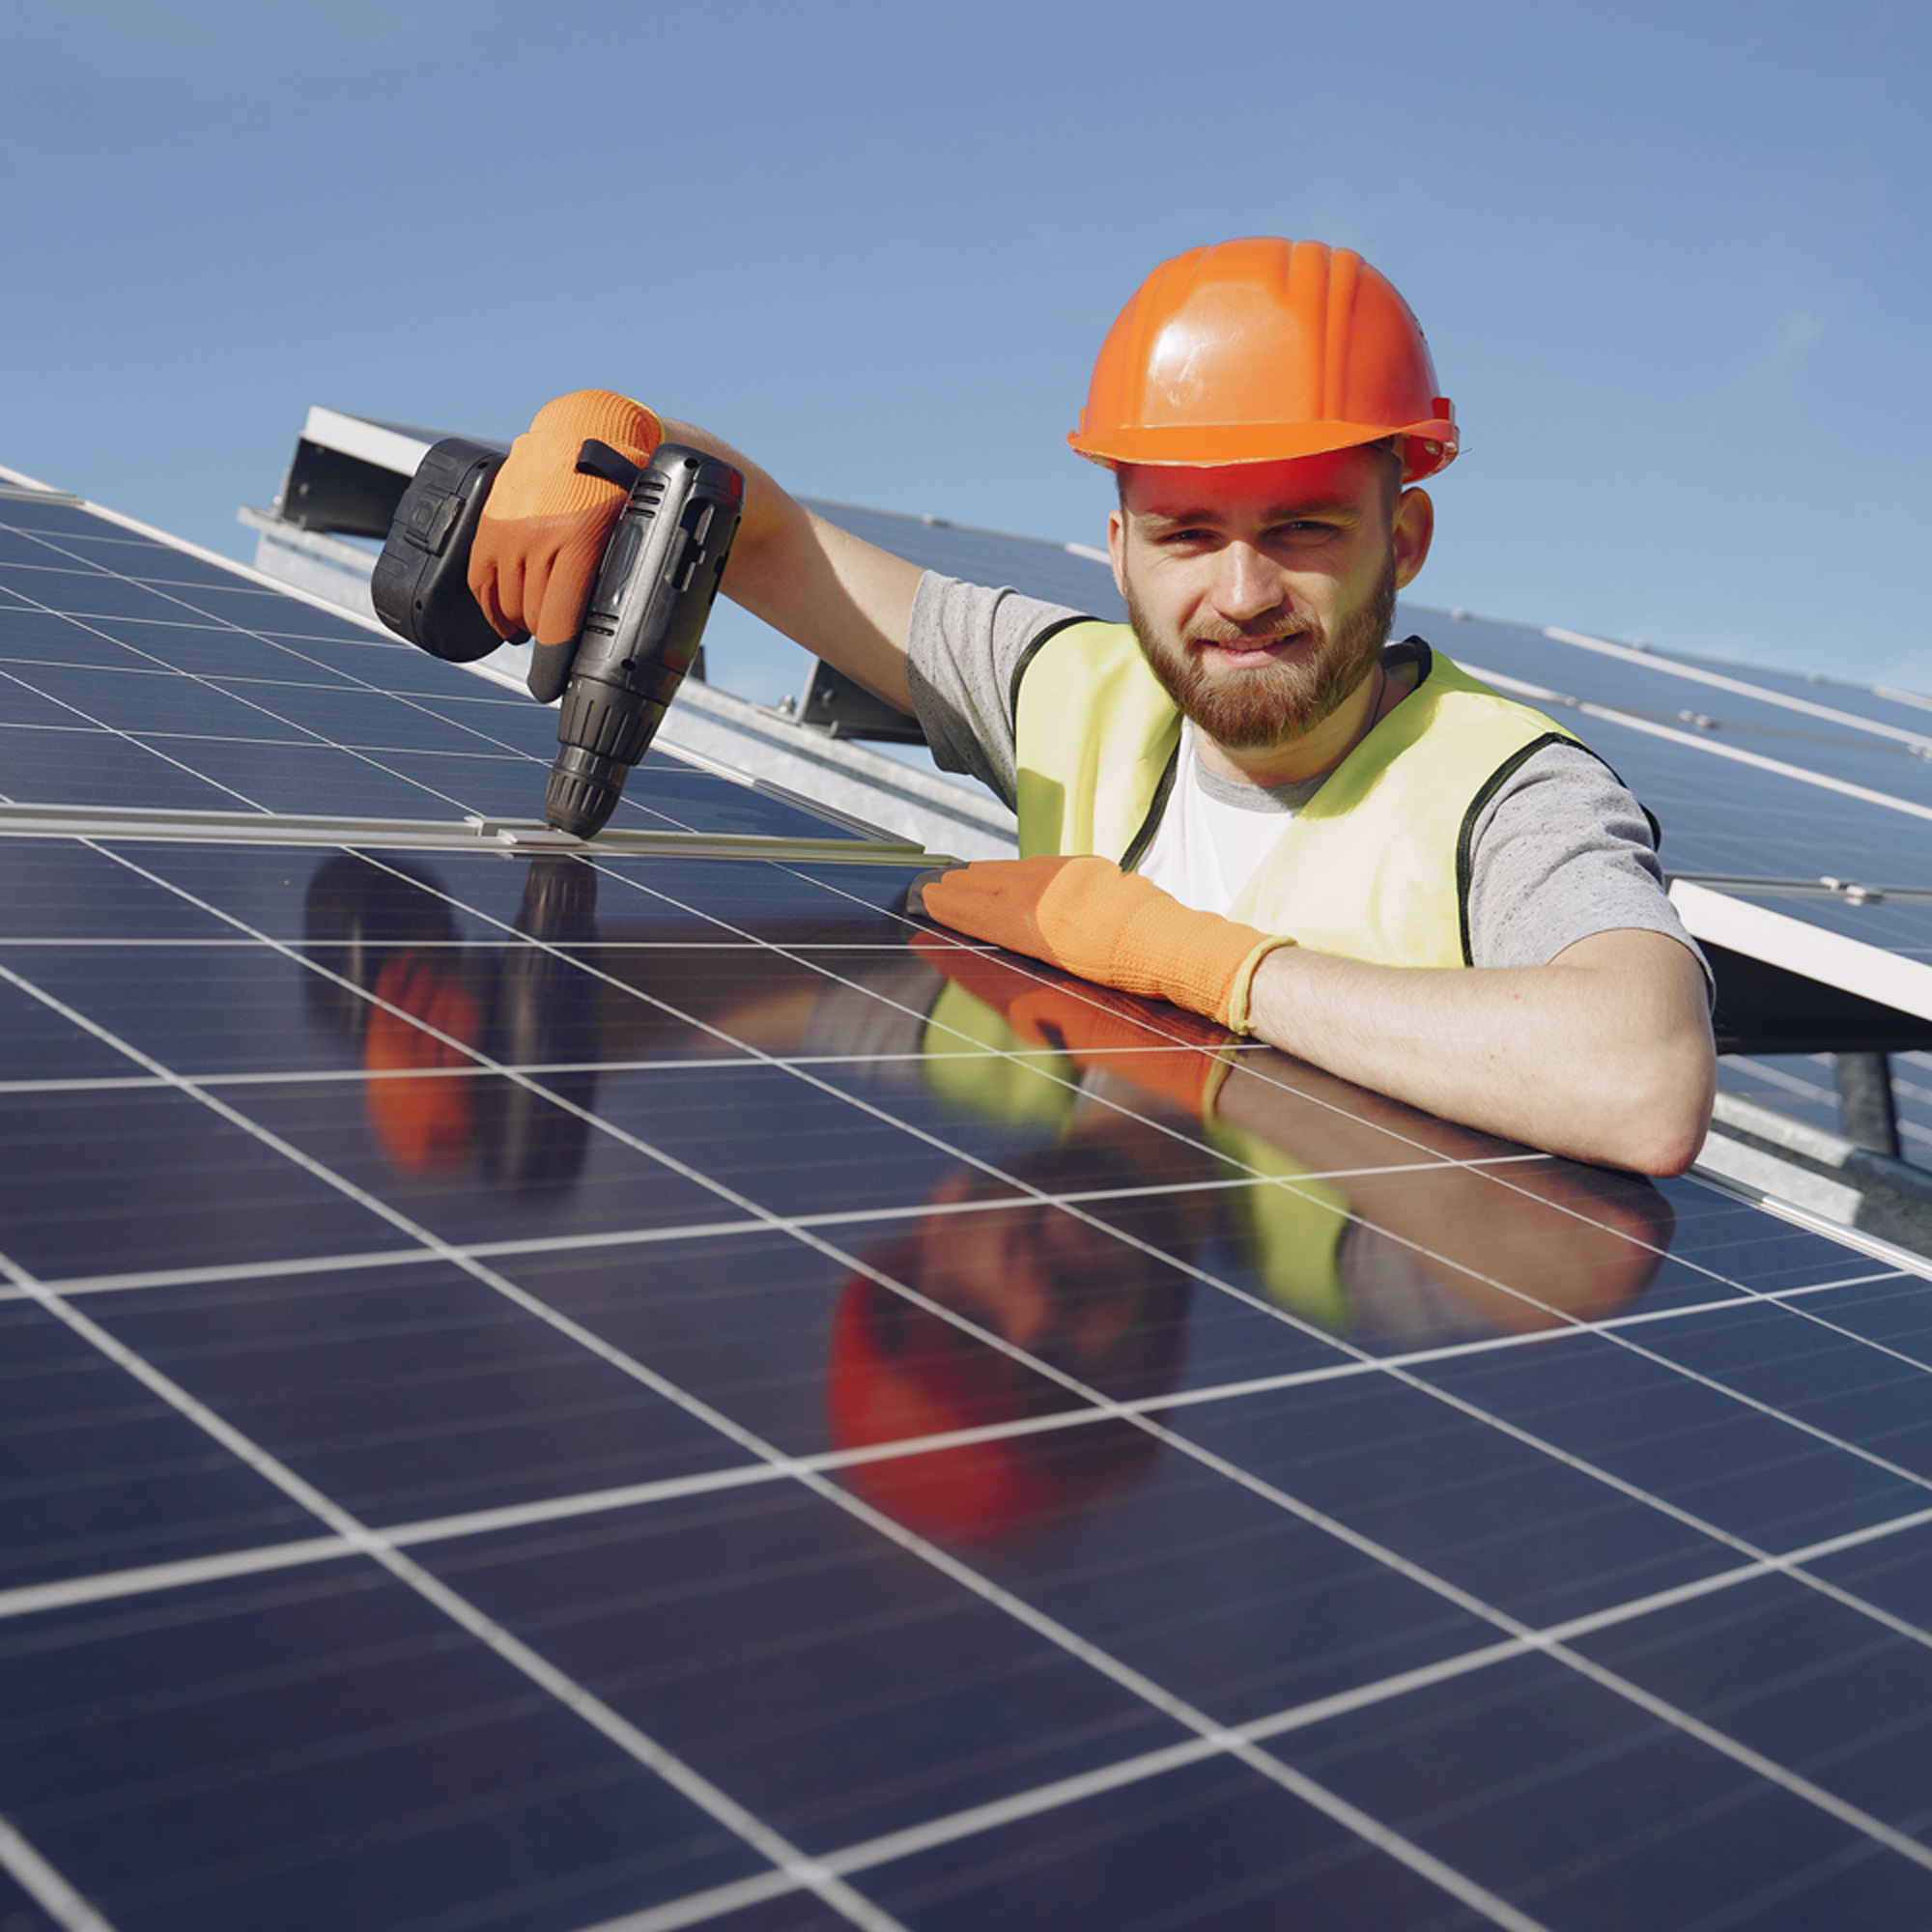 Installer installing a solar panel using a drill with orange cap